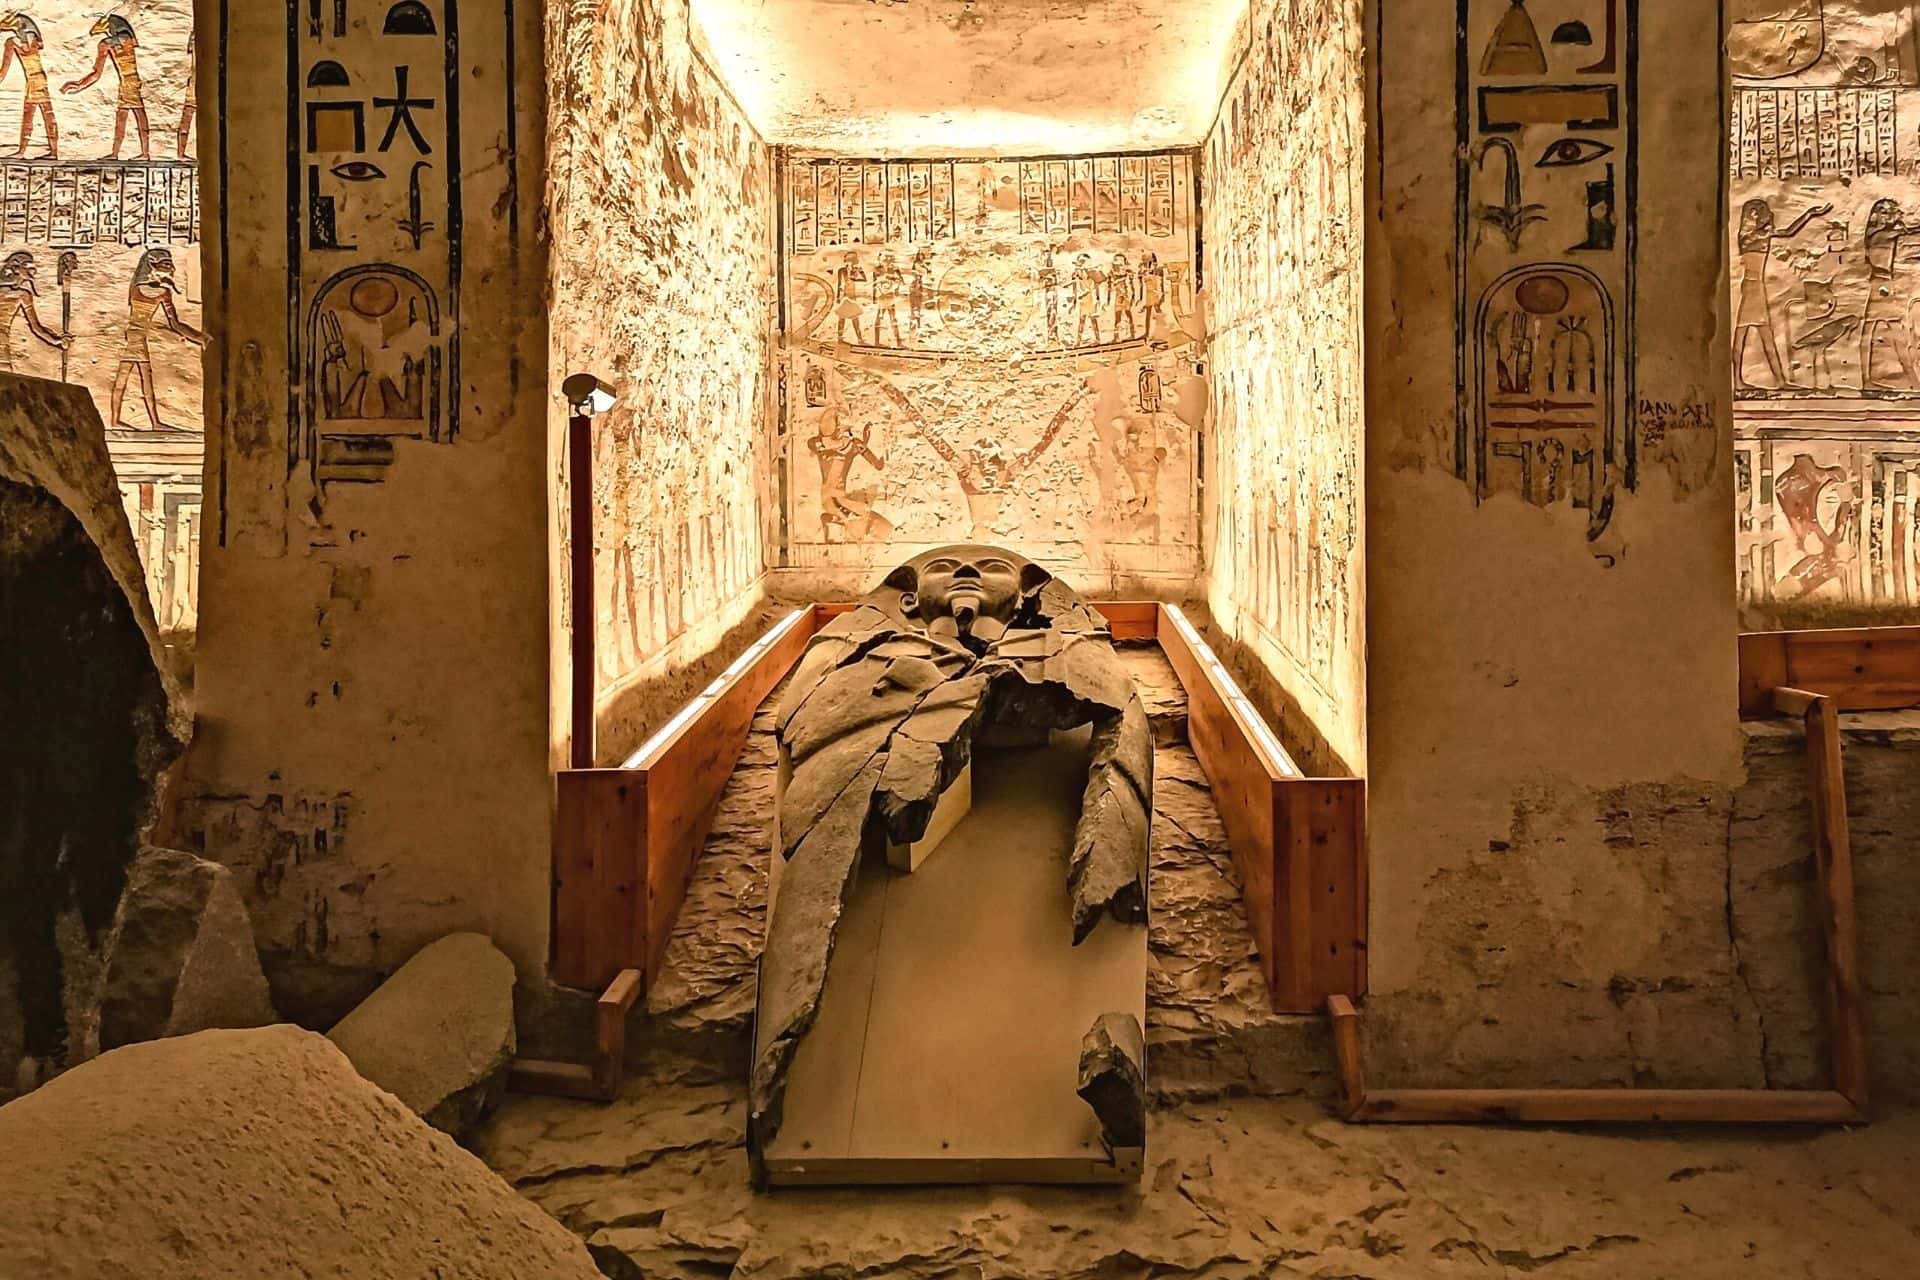 Valley of the Kings  Definition, Tombs, & Facts - Journey To Egypt